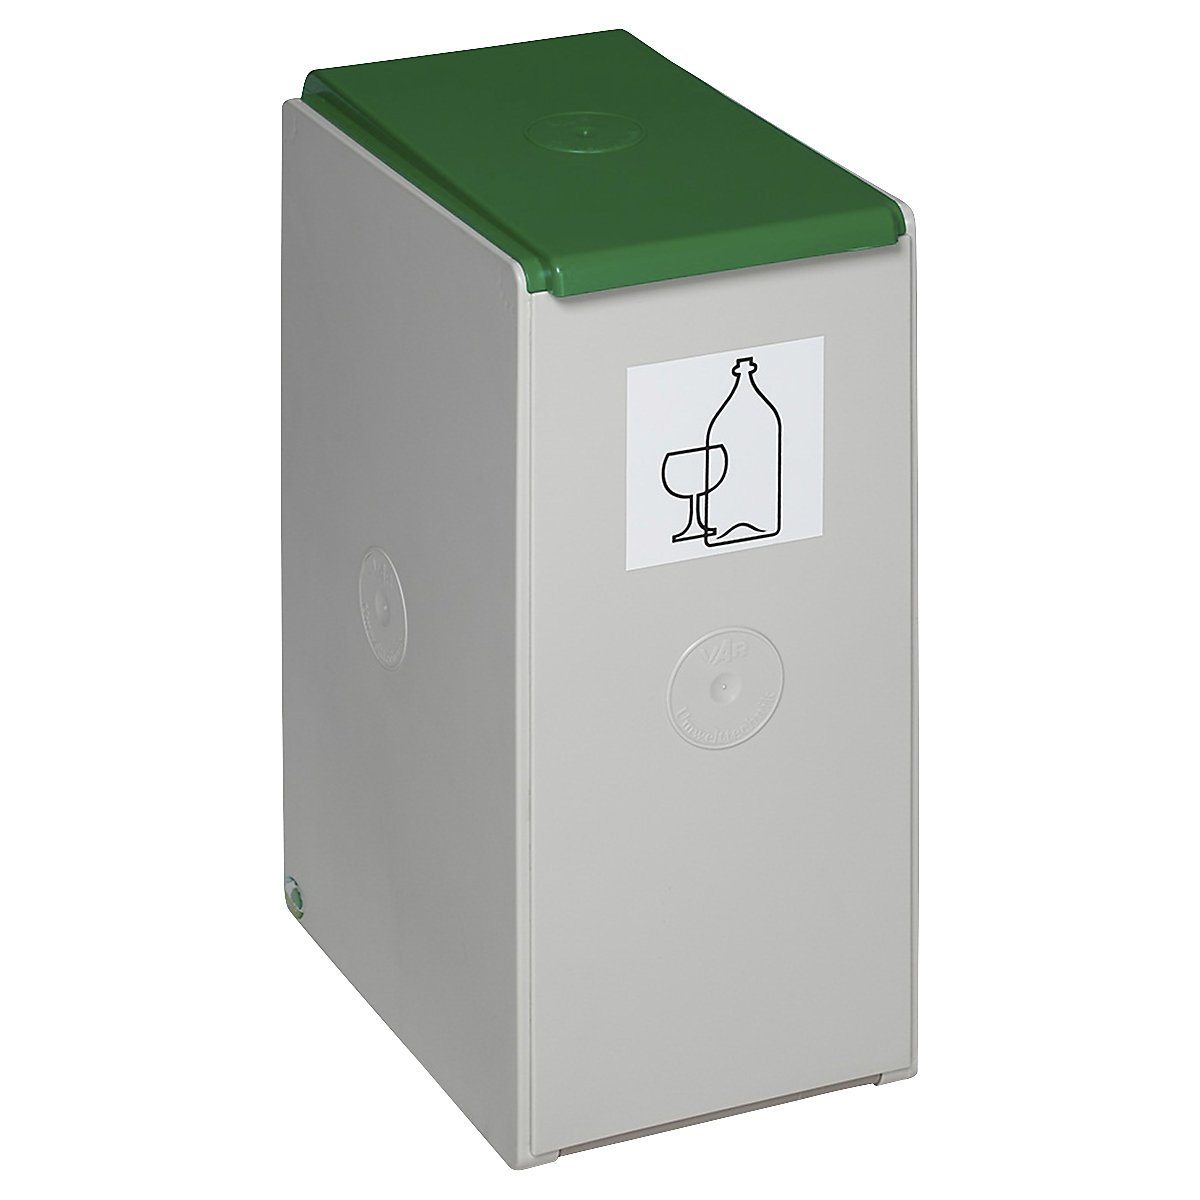 Recyclable waste collector made of plastic - VAR